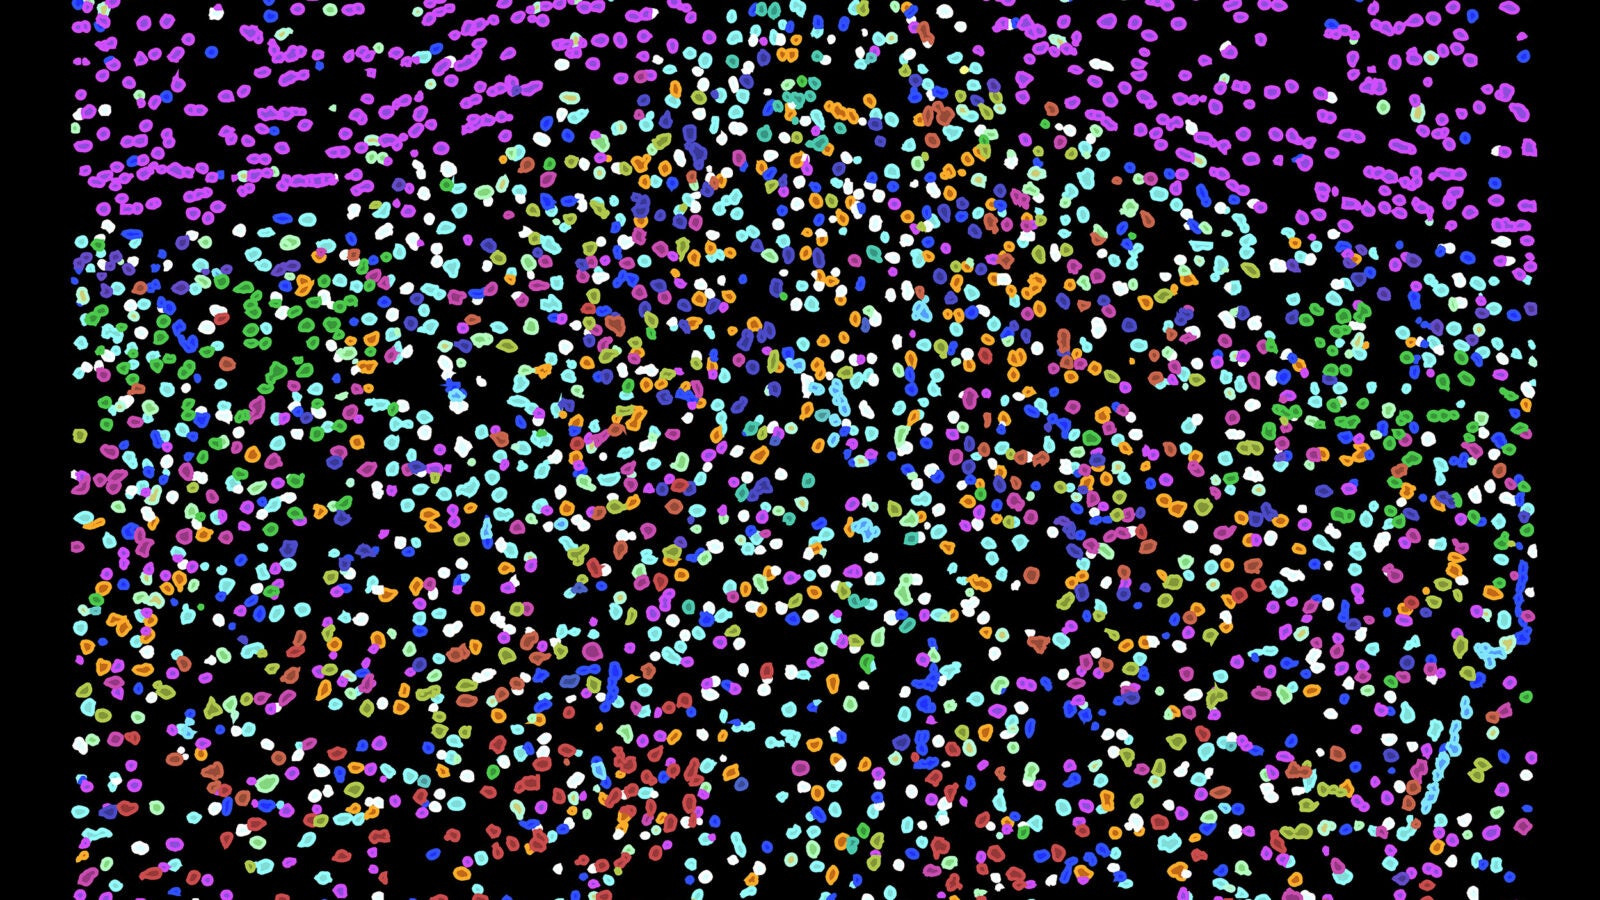 Imaged cells of the hypothalamic preoptic region of a mouse brain. Different colors illustrate some of the cell diversity uncovered by MERFISH imaging.